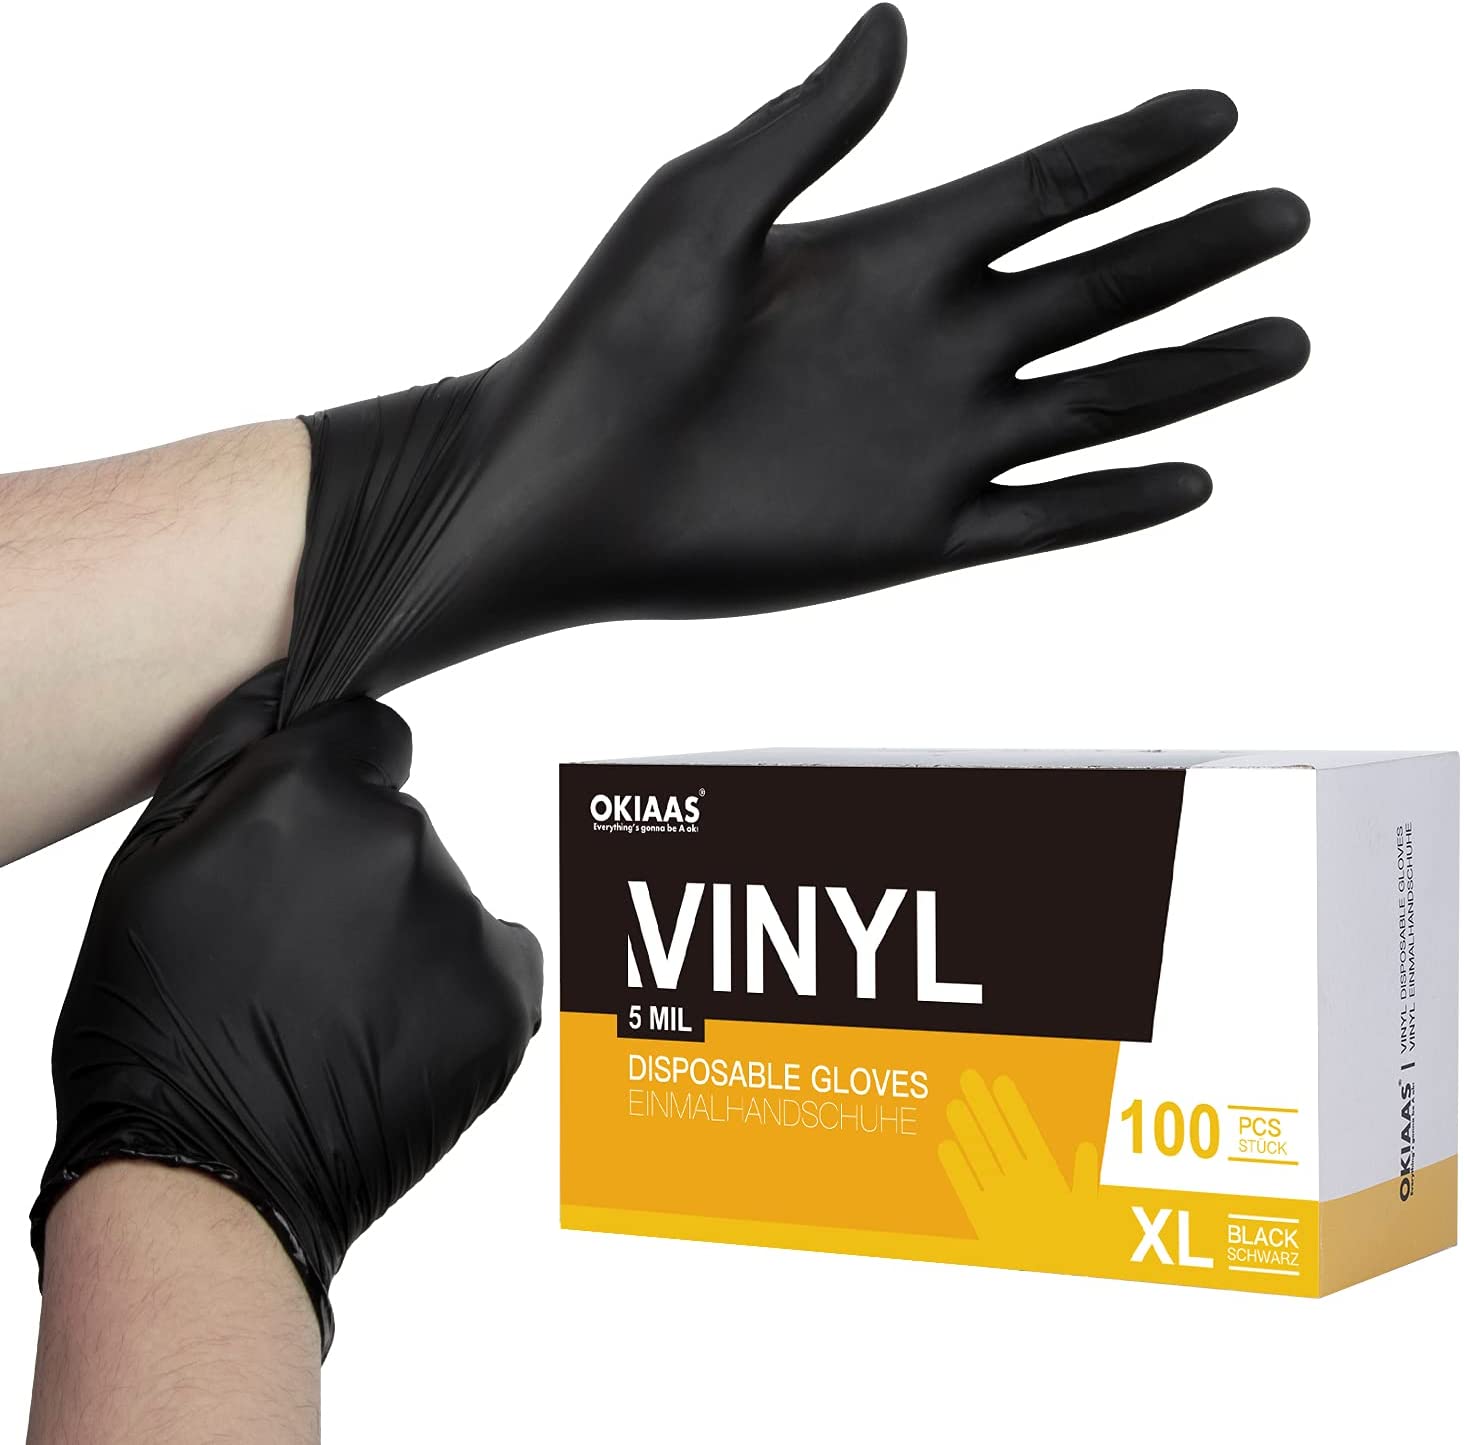 50/100 Count Black Vinyl Disposable Gloves, 5 mil, Chemical Resistant, Powder free & Latex free